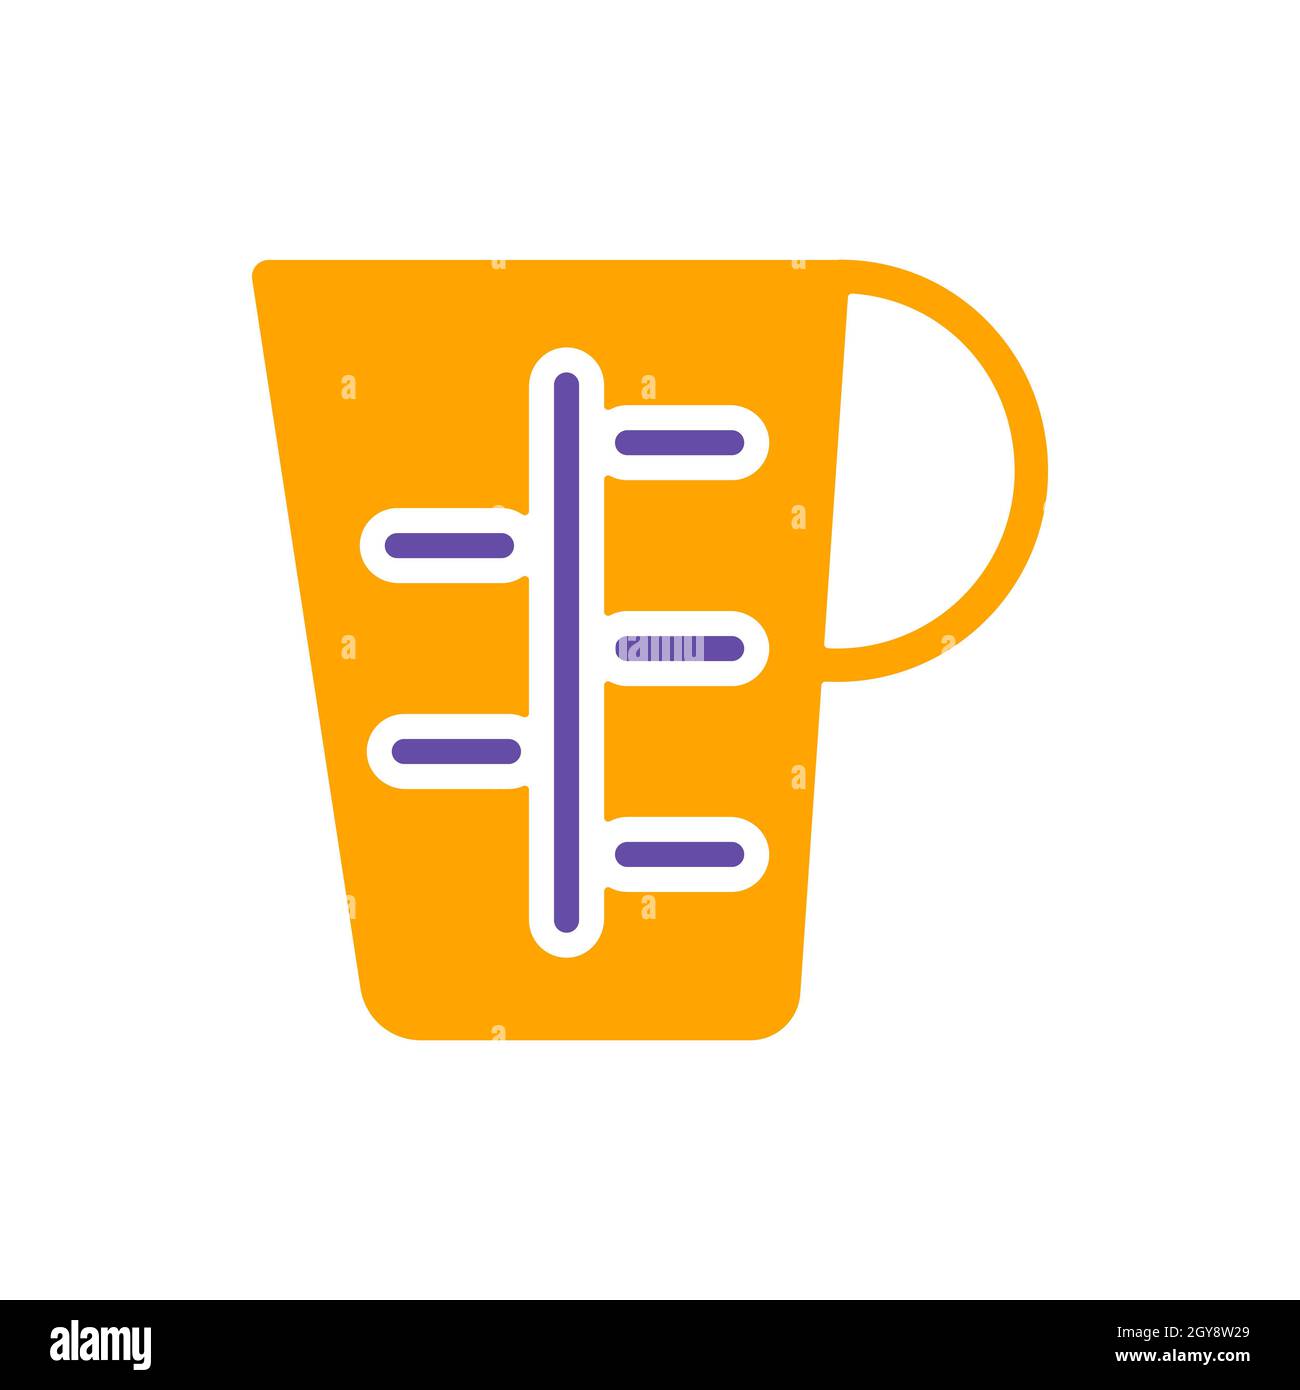 https://c8.alamy.com/comp/2GY8W29/measuring-cup-beaker-vector-glyph-icon-kitchen-appliance-graph-symbol-for-cooking-web-site-design-logo-app-ui-2GY8W29.jpg